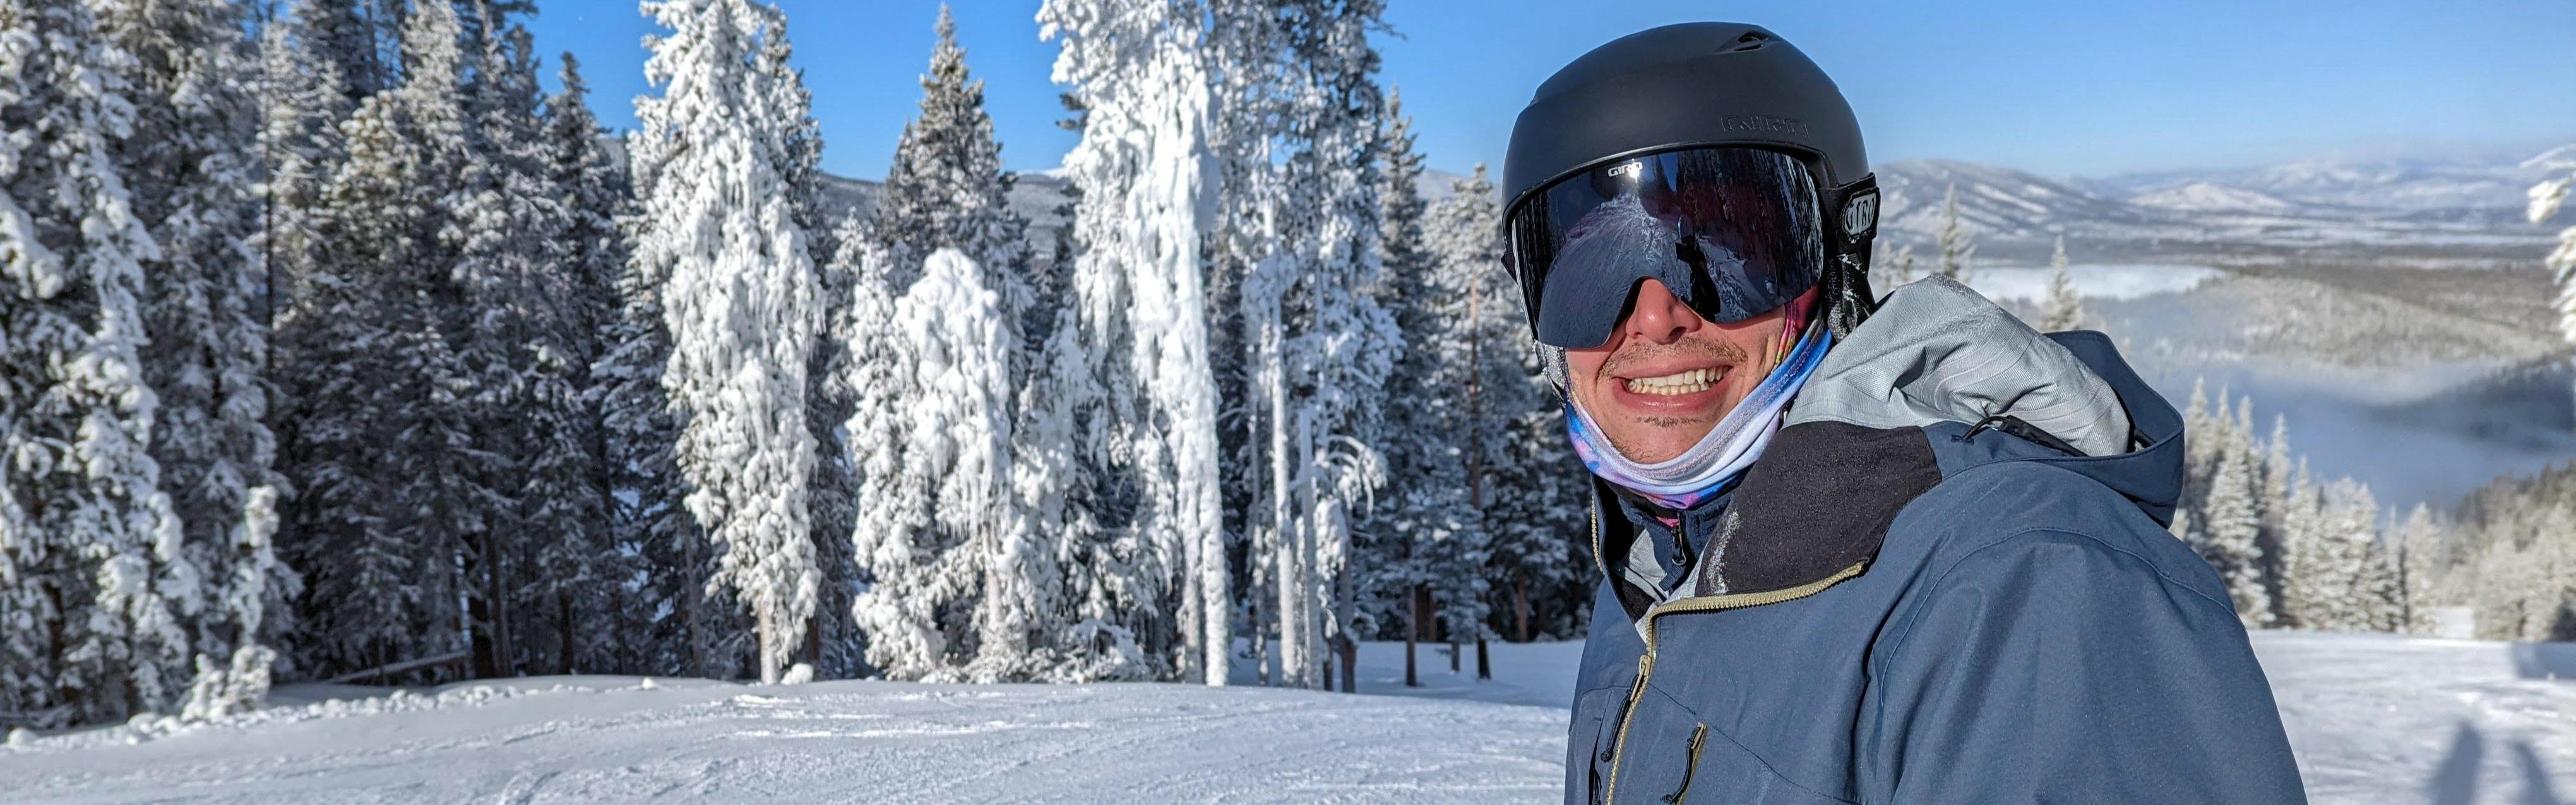 A skier standing on a snowy run with snowy mountains in the background wearing the Giro Contour Goggles.